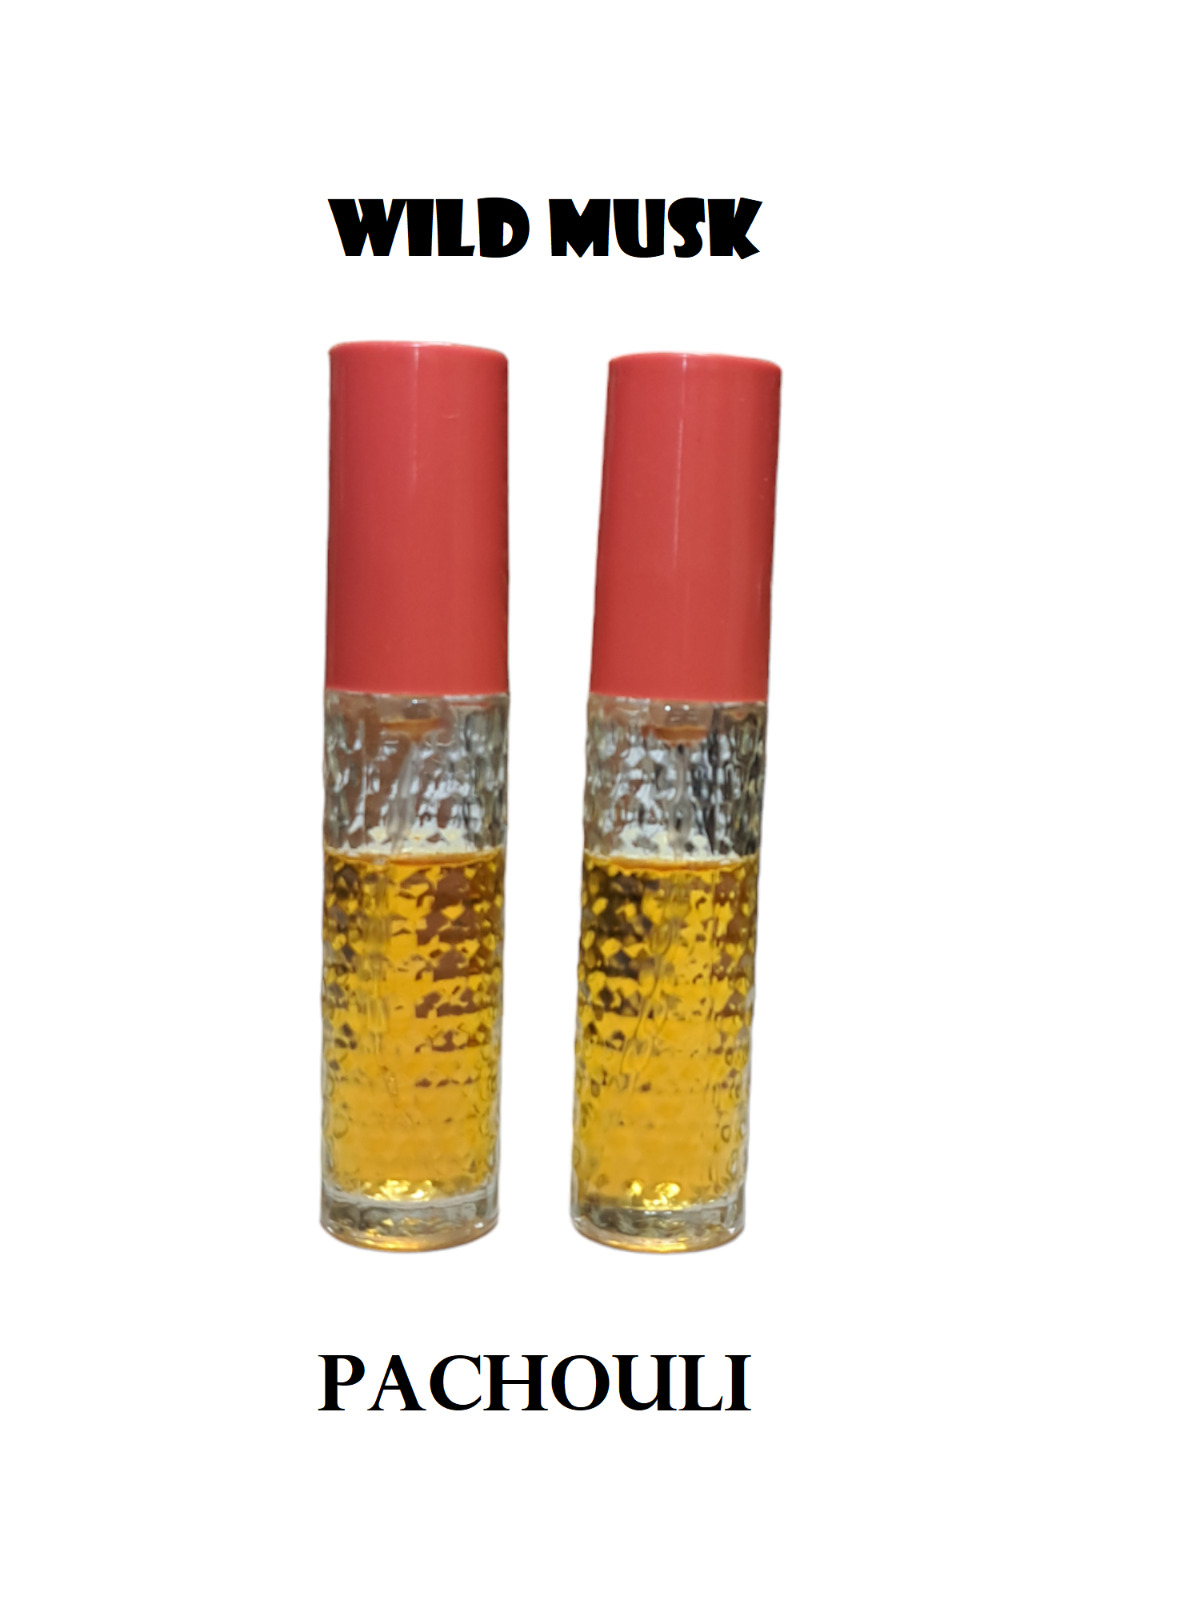 Wild Musk Pachouli Blend Cologne Spray by Coty .5 fl oz Lot Of 2 CAPS ARE BROKEN